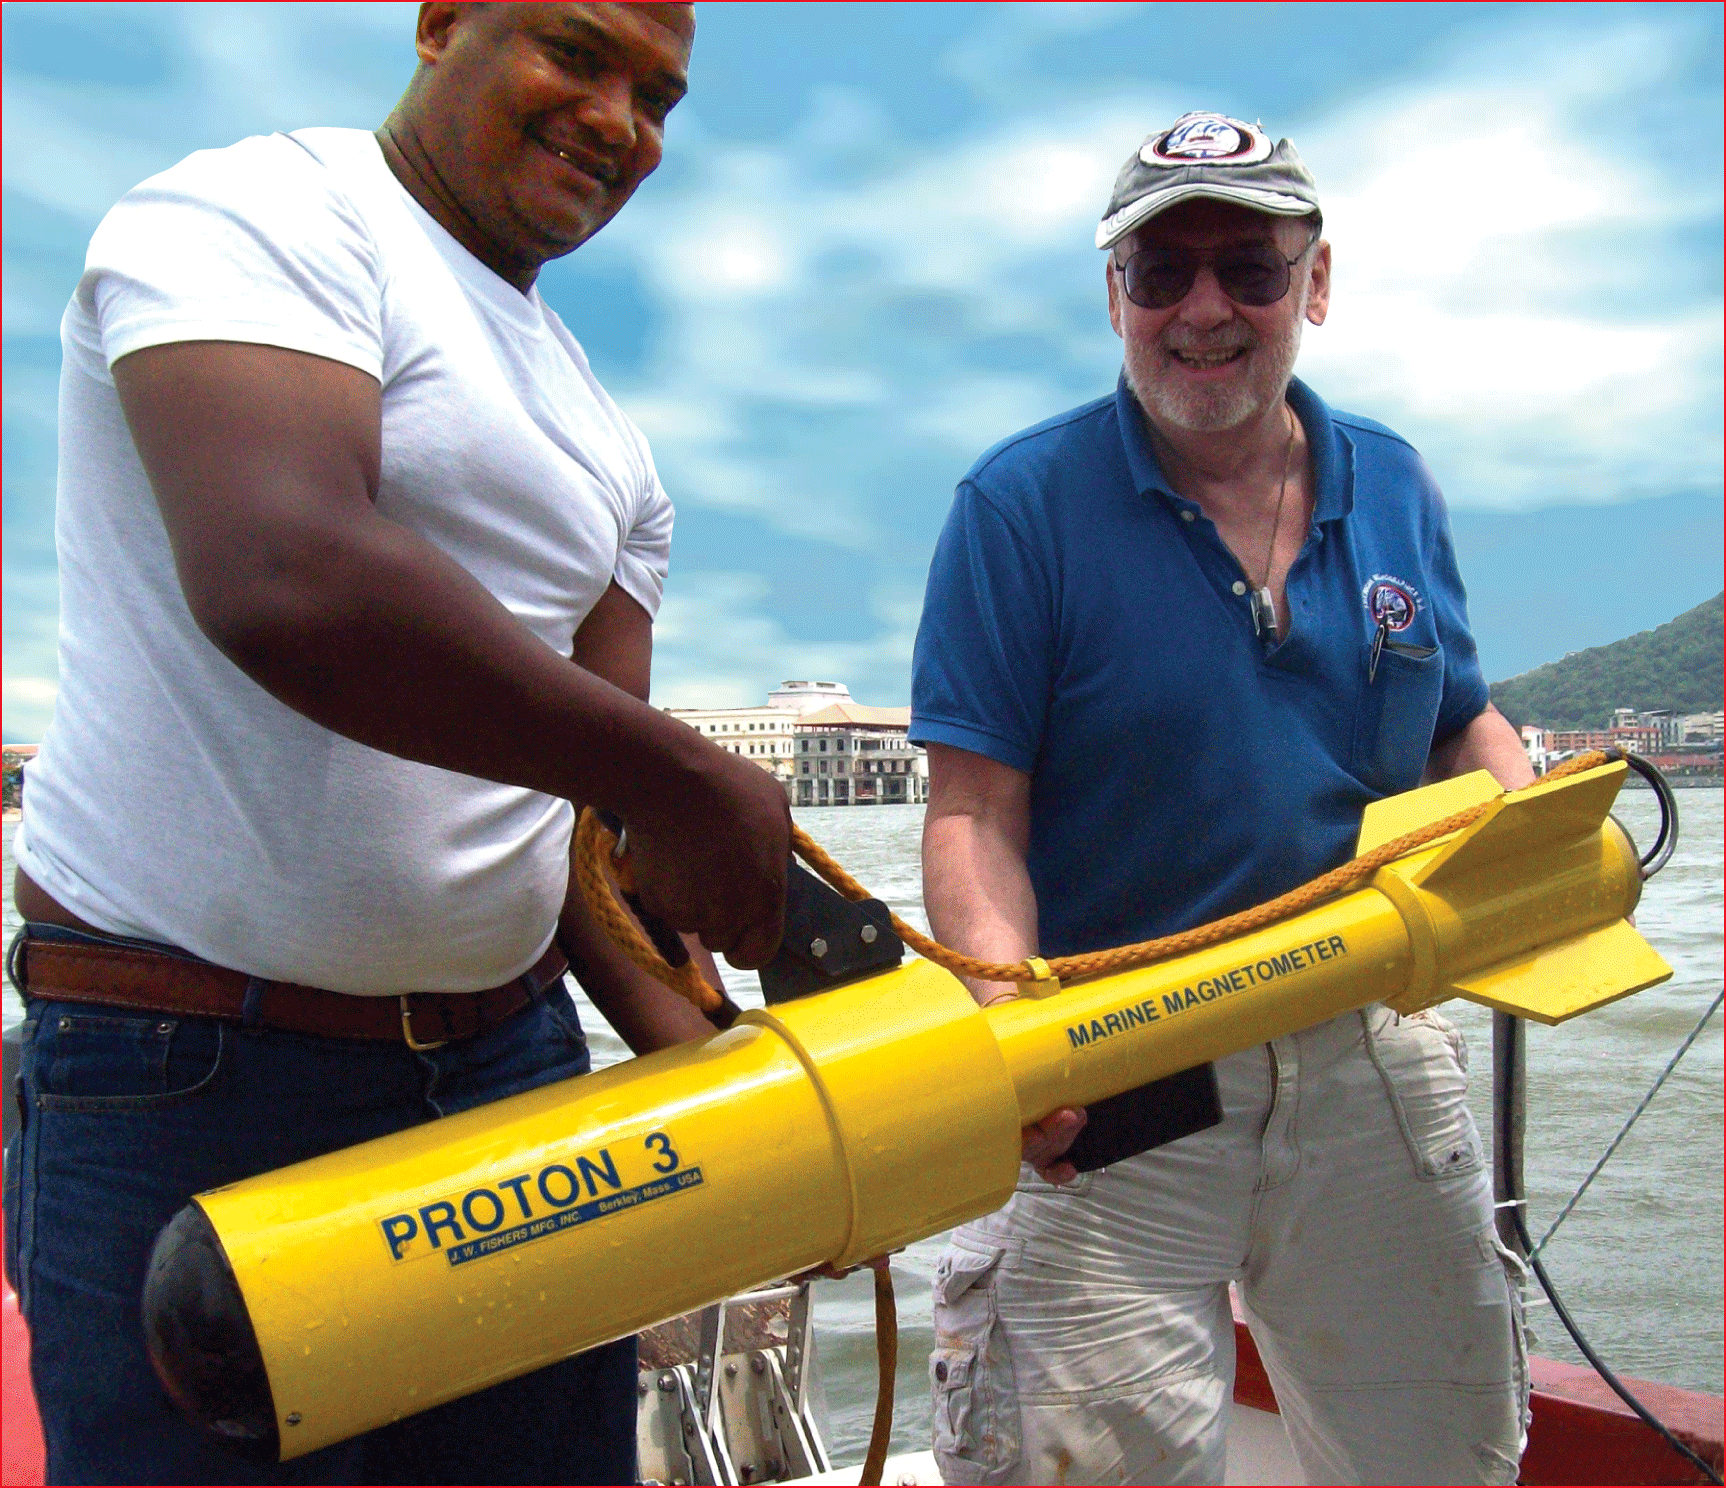 Two man holding a Proton 3 - Marine Magnetometer